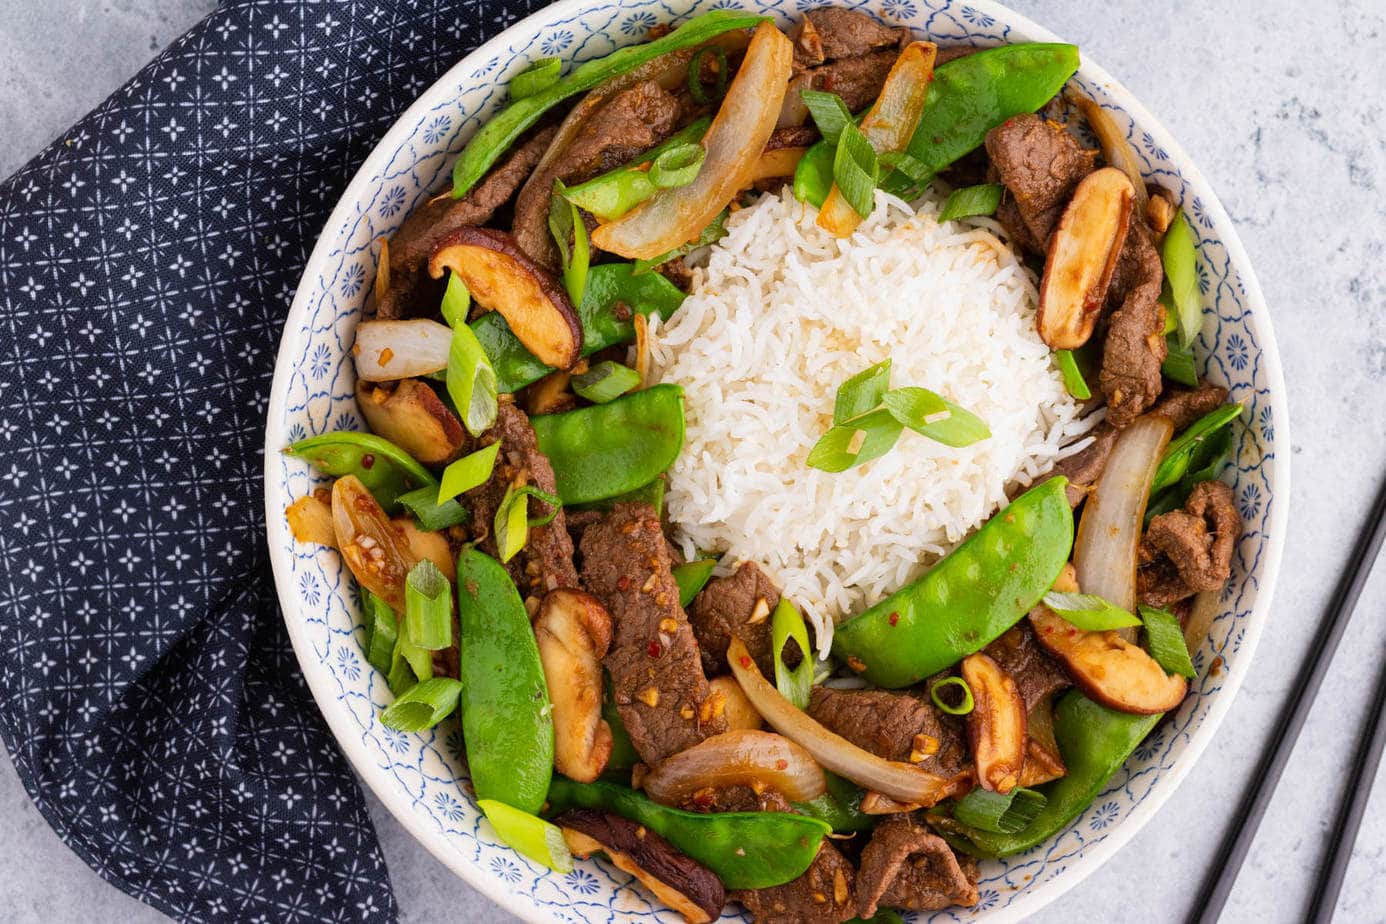 A bowl filled with beef stir fry and snow peas, white rice, shiitake mushrooms.